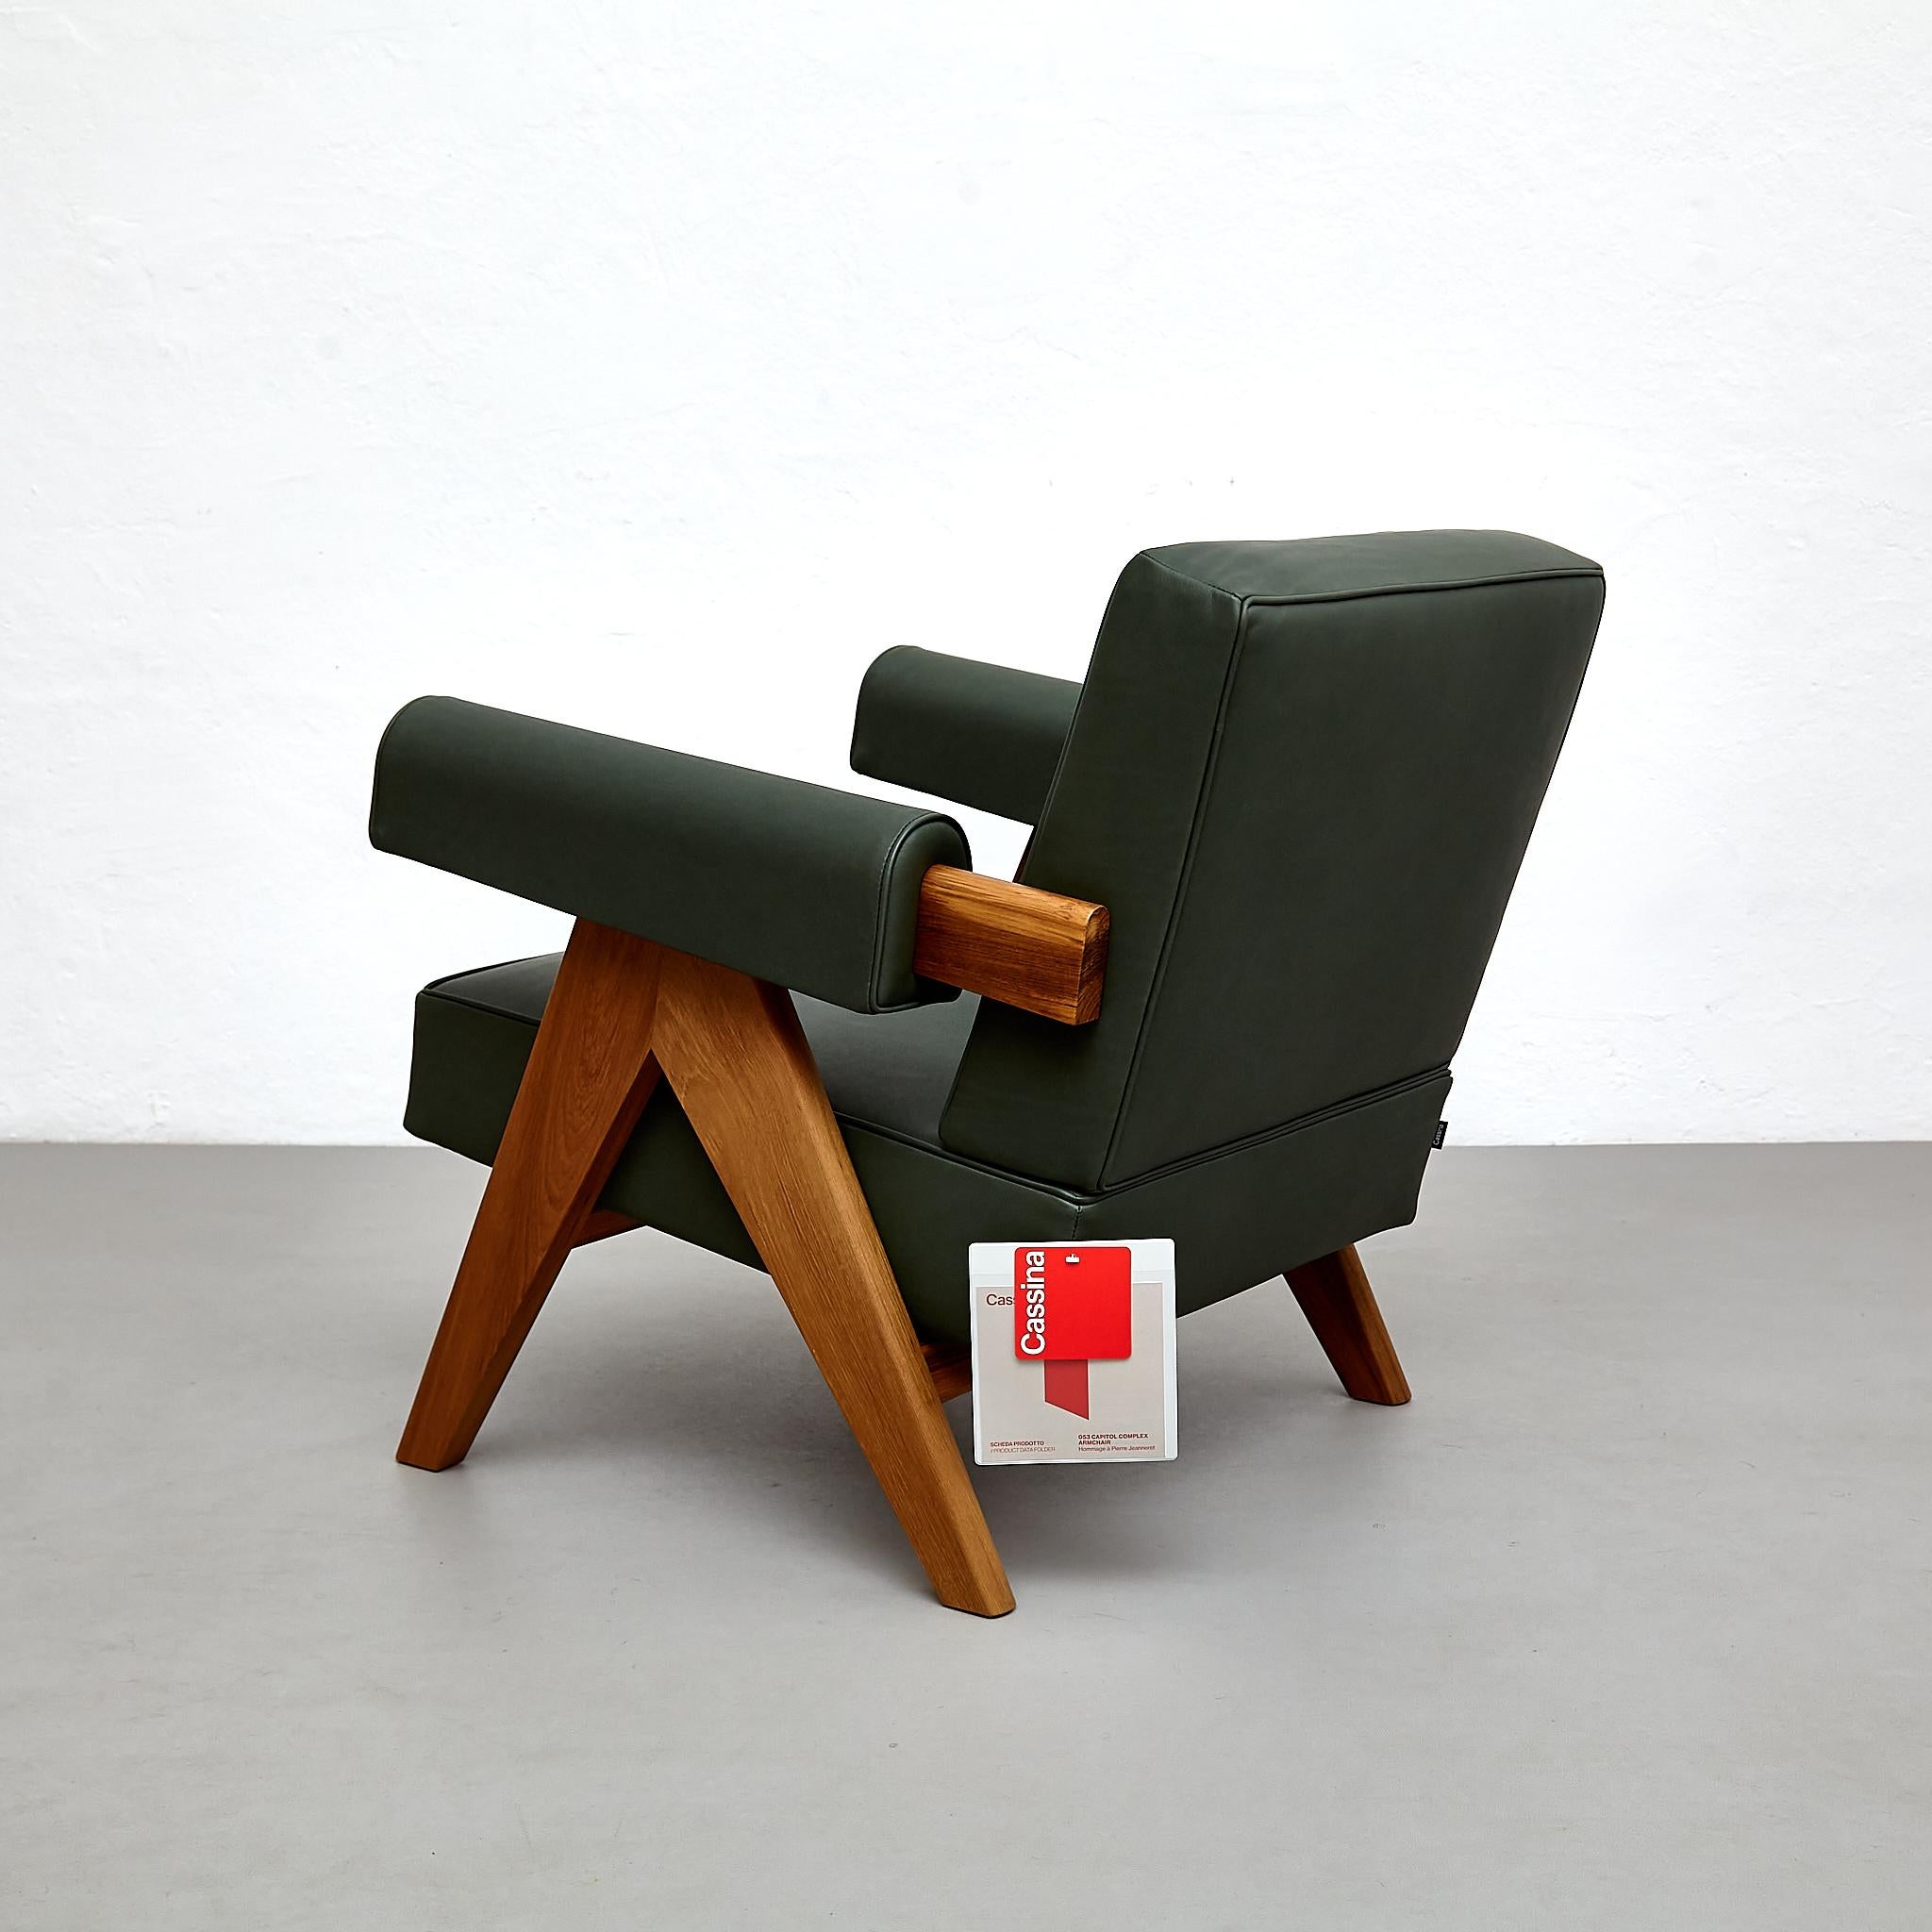 Pierre Jeanneret 053 Capitol Complex Teak Wood Green Leather Armchair by Cassina In New Condition For Sale In Barcelona, Barcelona